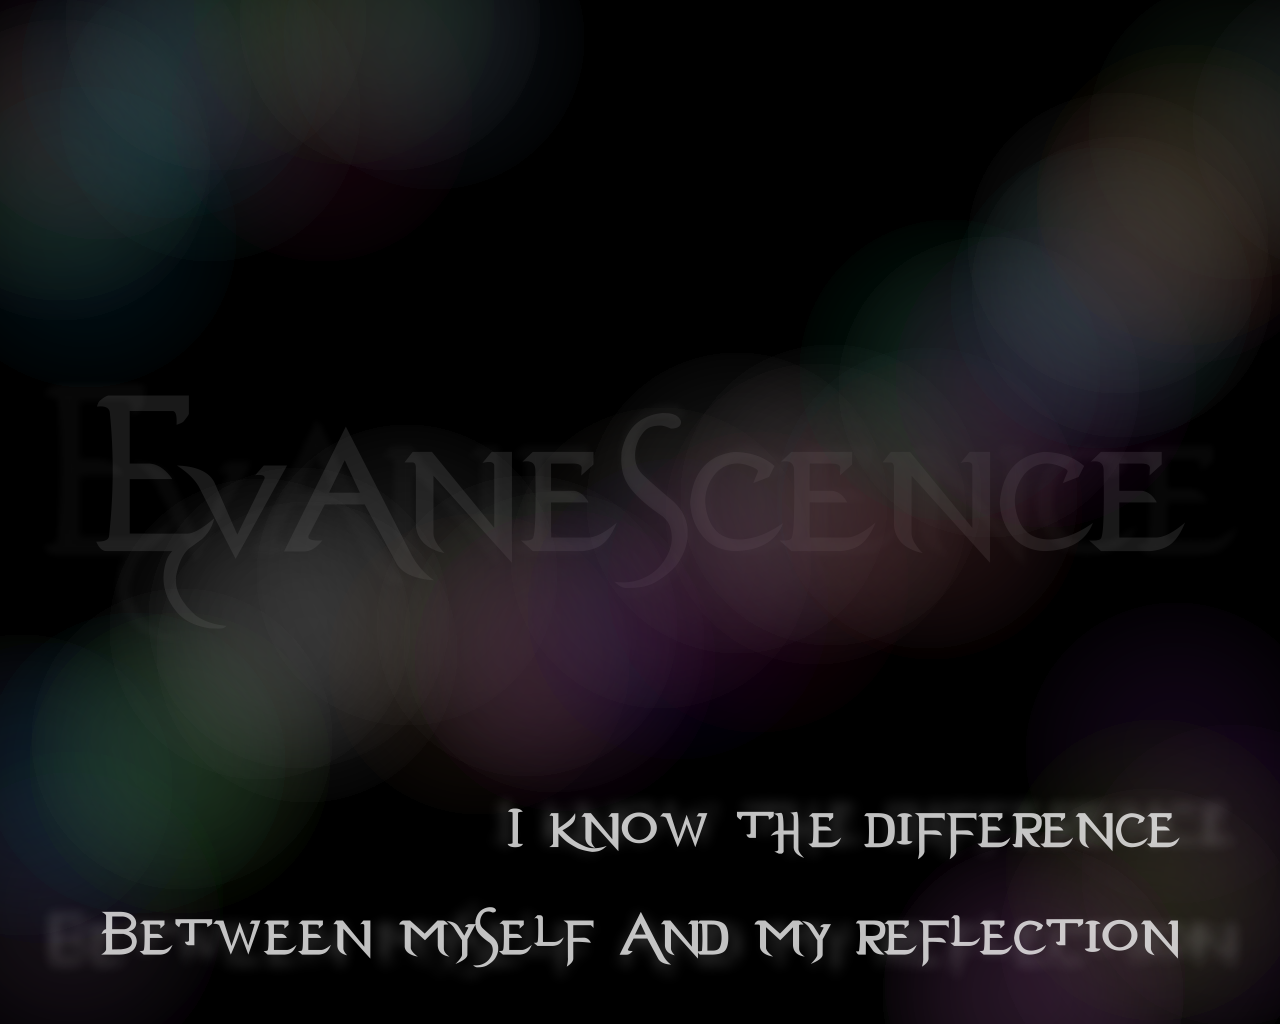 http://2.bp.blogspot.com/-HF-5OOwf7s8/TaXvmCmK24I/AAAAAAAAAH8/fVqRJyum43o/s1600/Breathe_No_More_Evanescence_Song_Lyric_Quote_in_Text_Image_1280x1024_Pixels.png